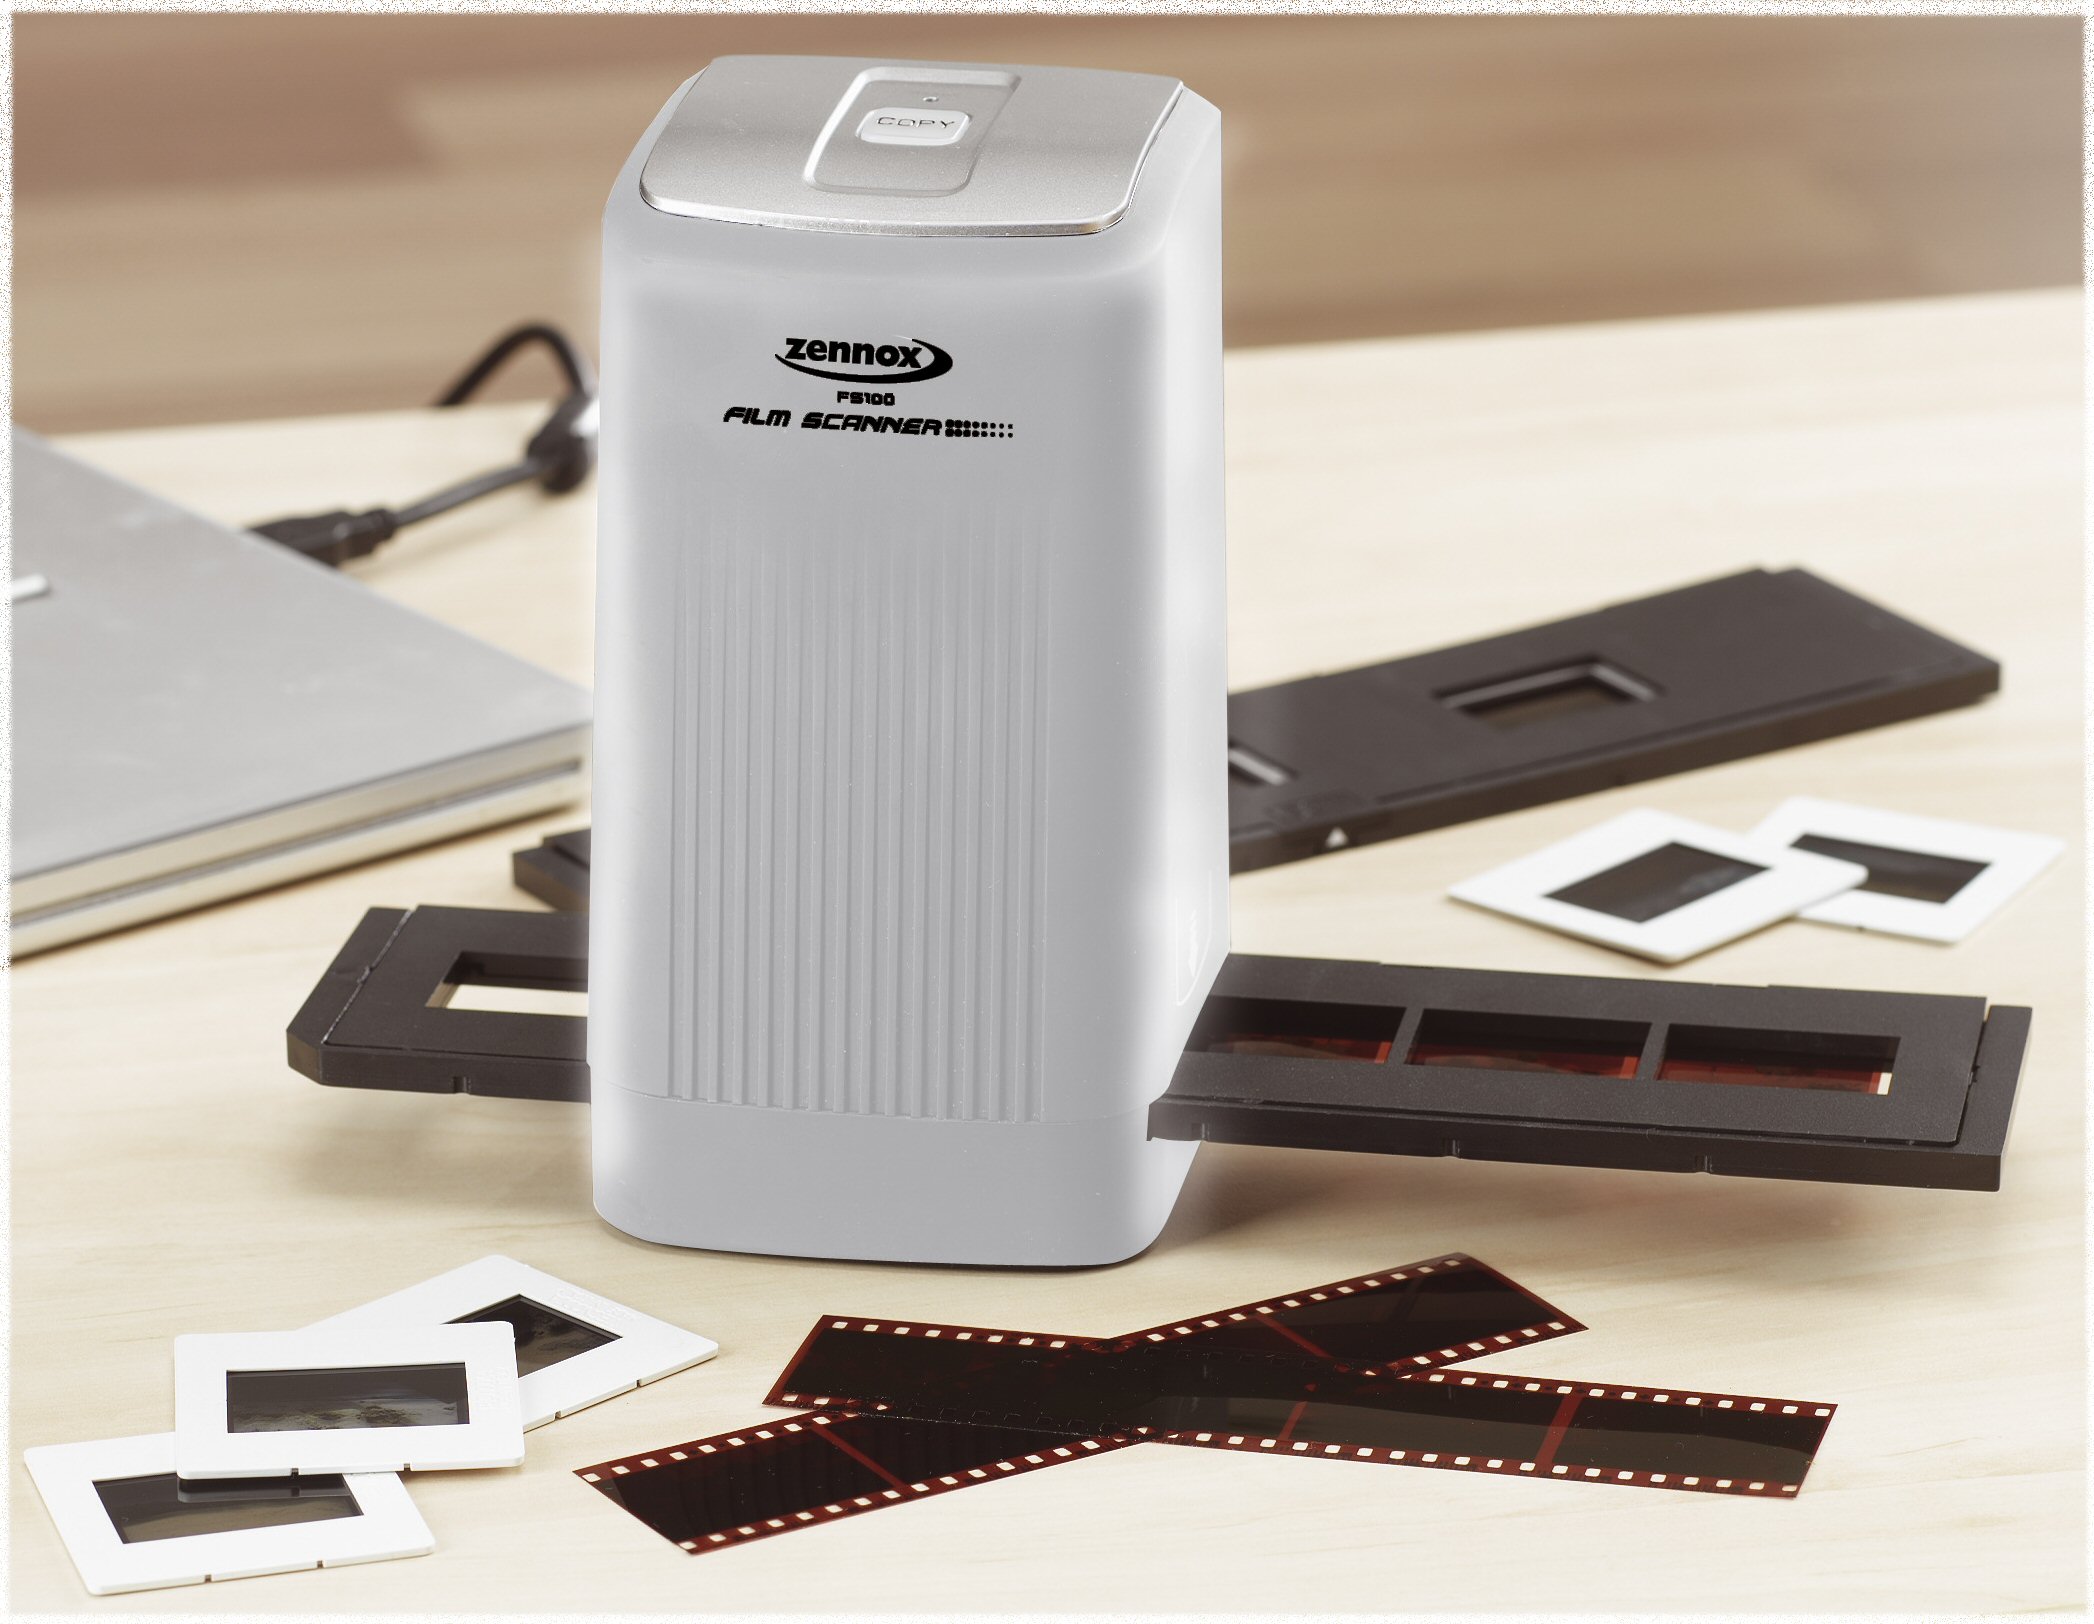 Digitise your film negatives and slides with the Zennox film imager  Breathe new life into cherished